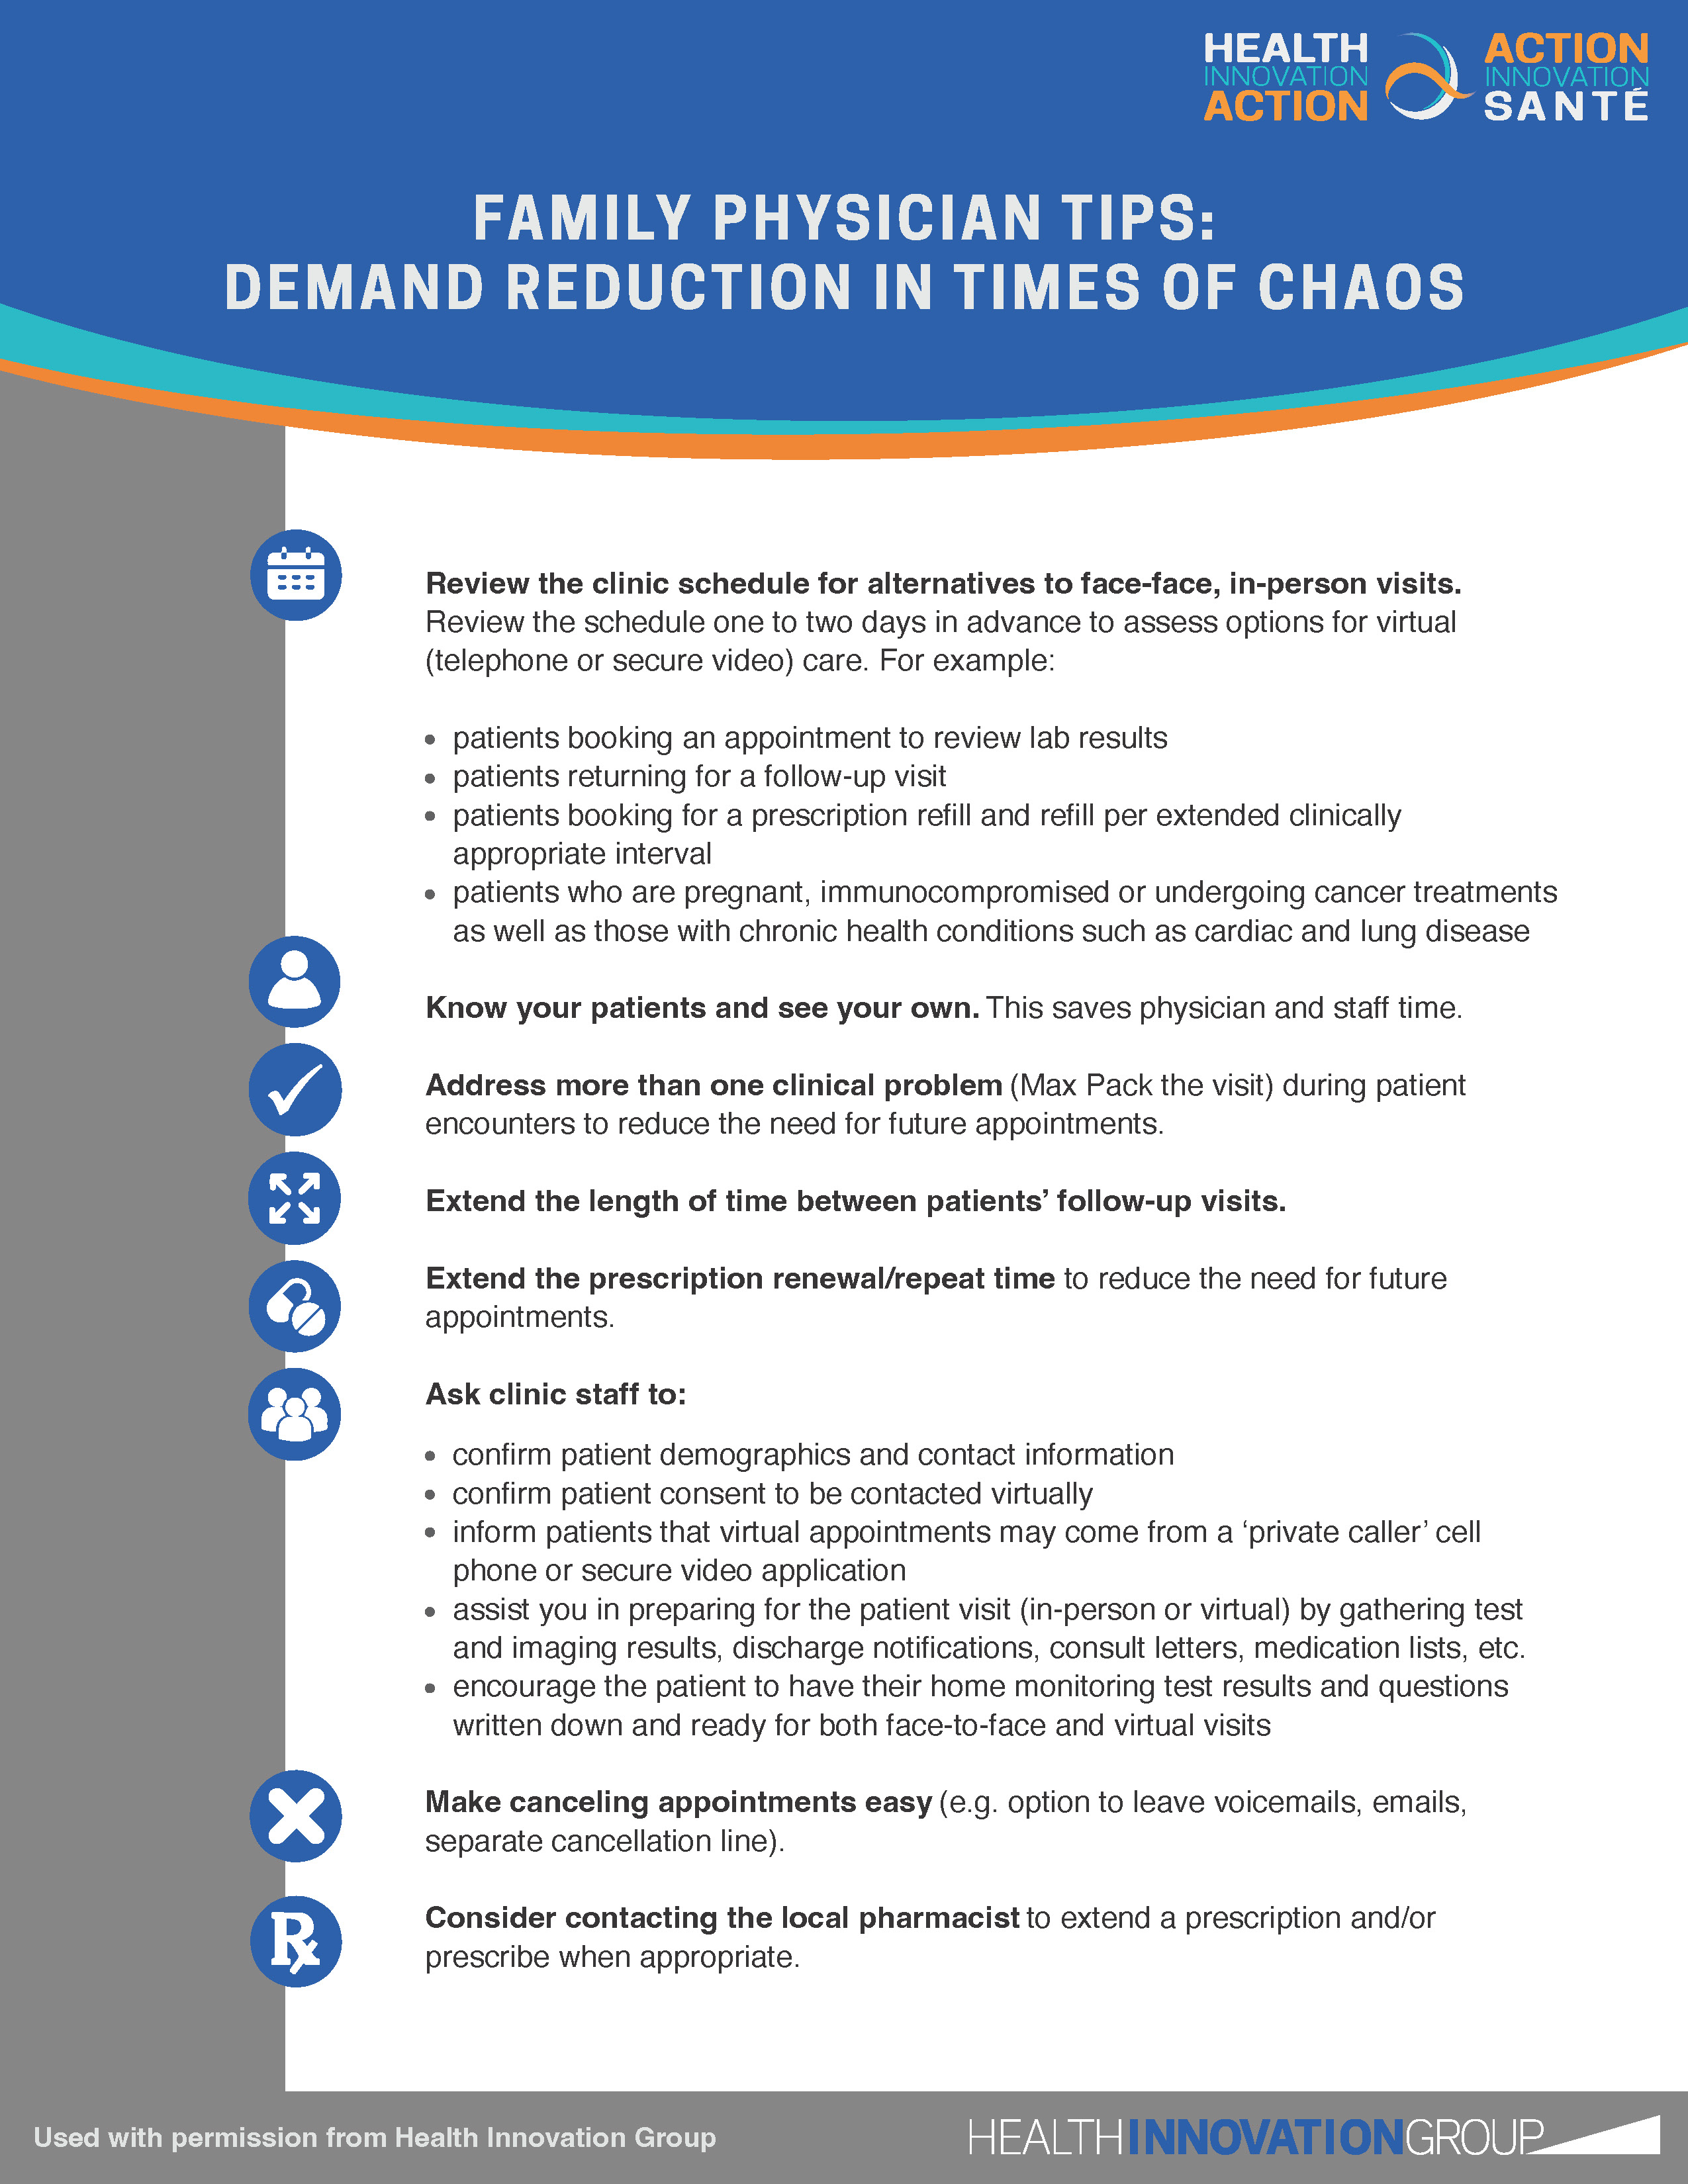 image of Tips to Reduce Demand in Times of Chaos